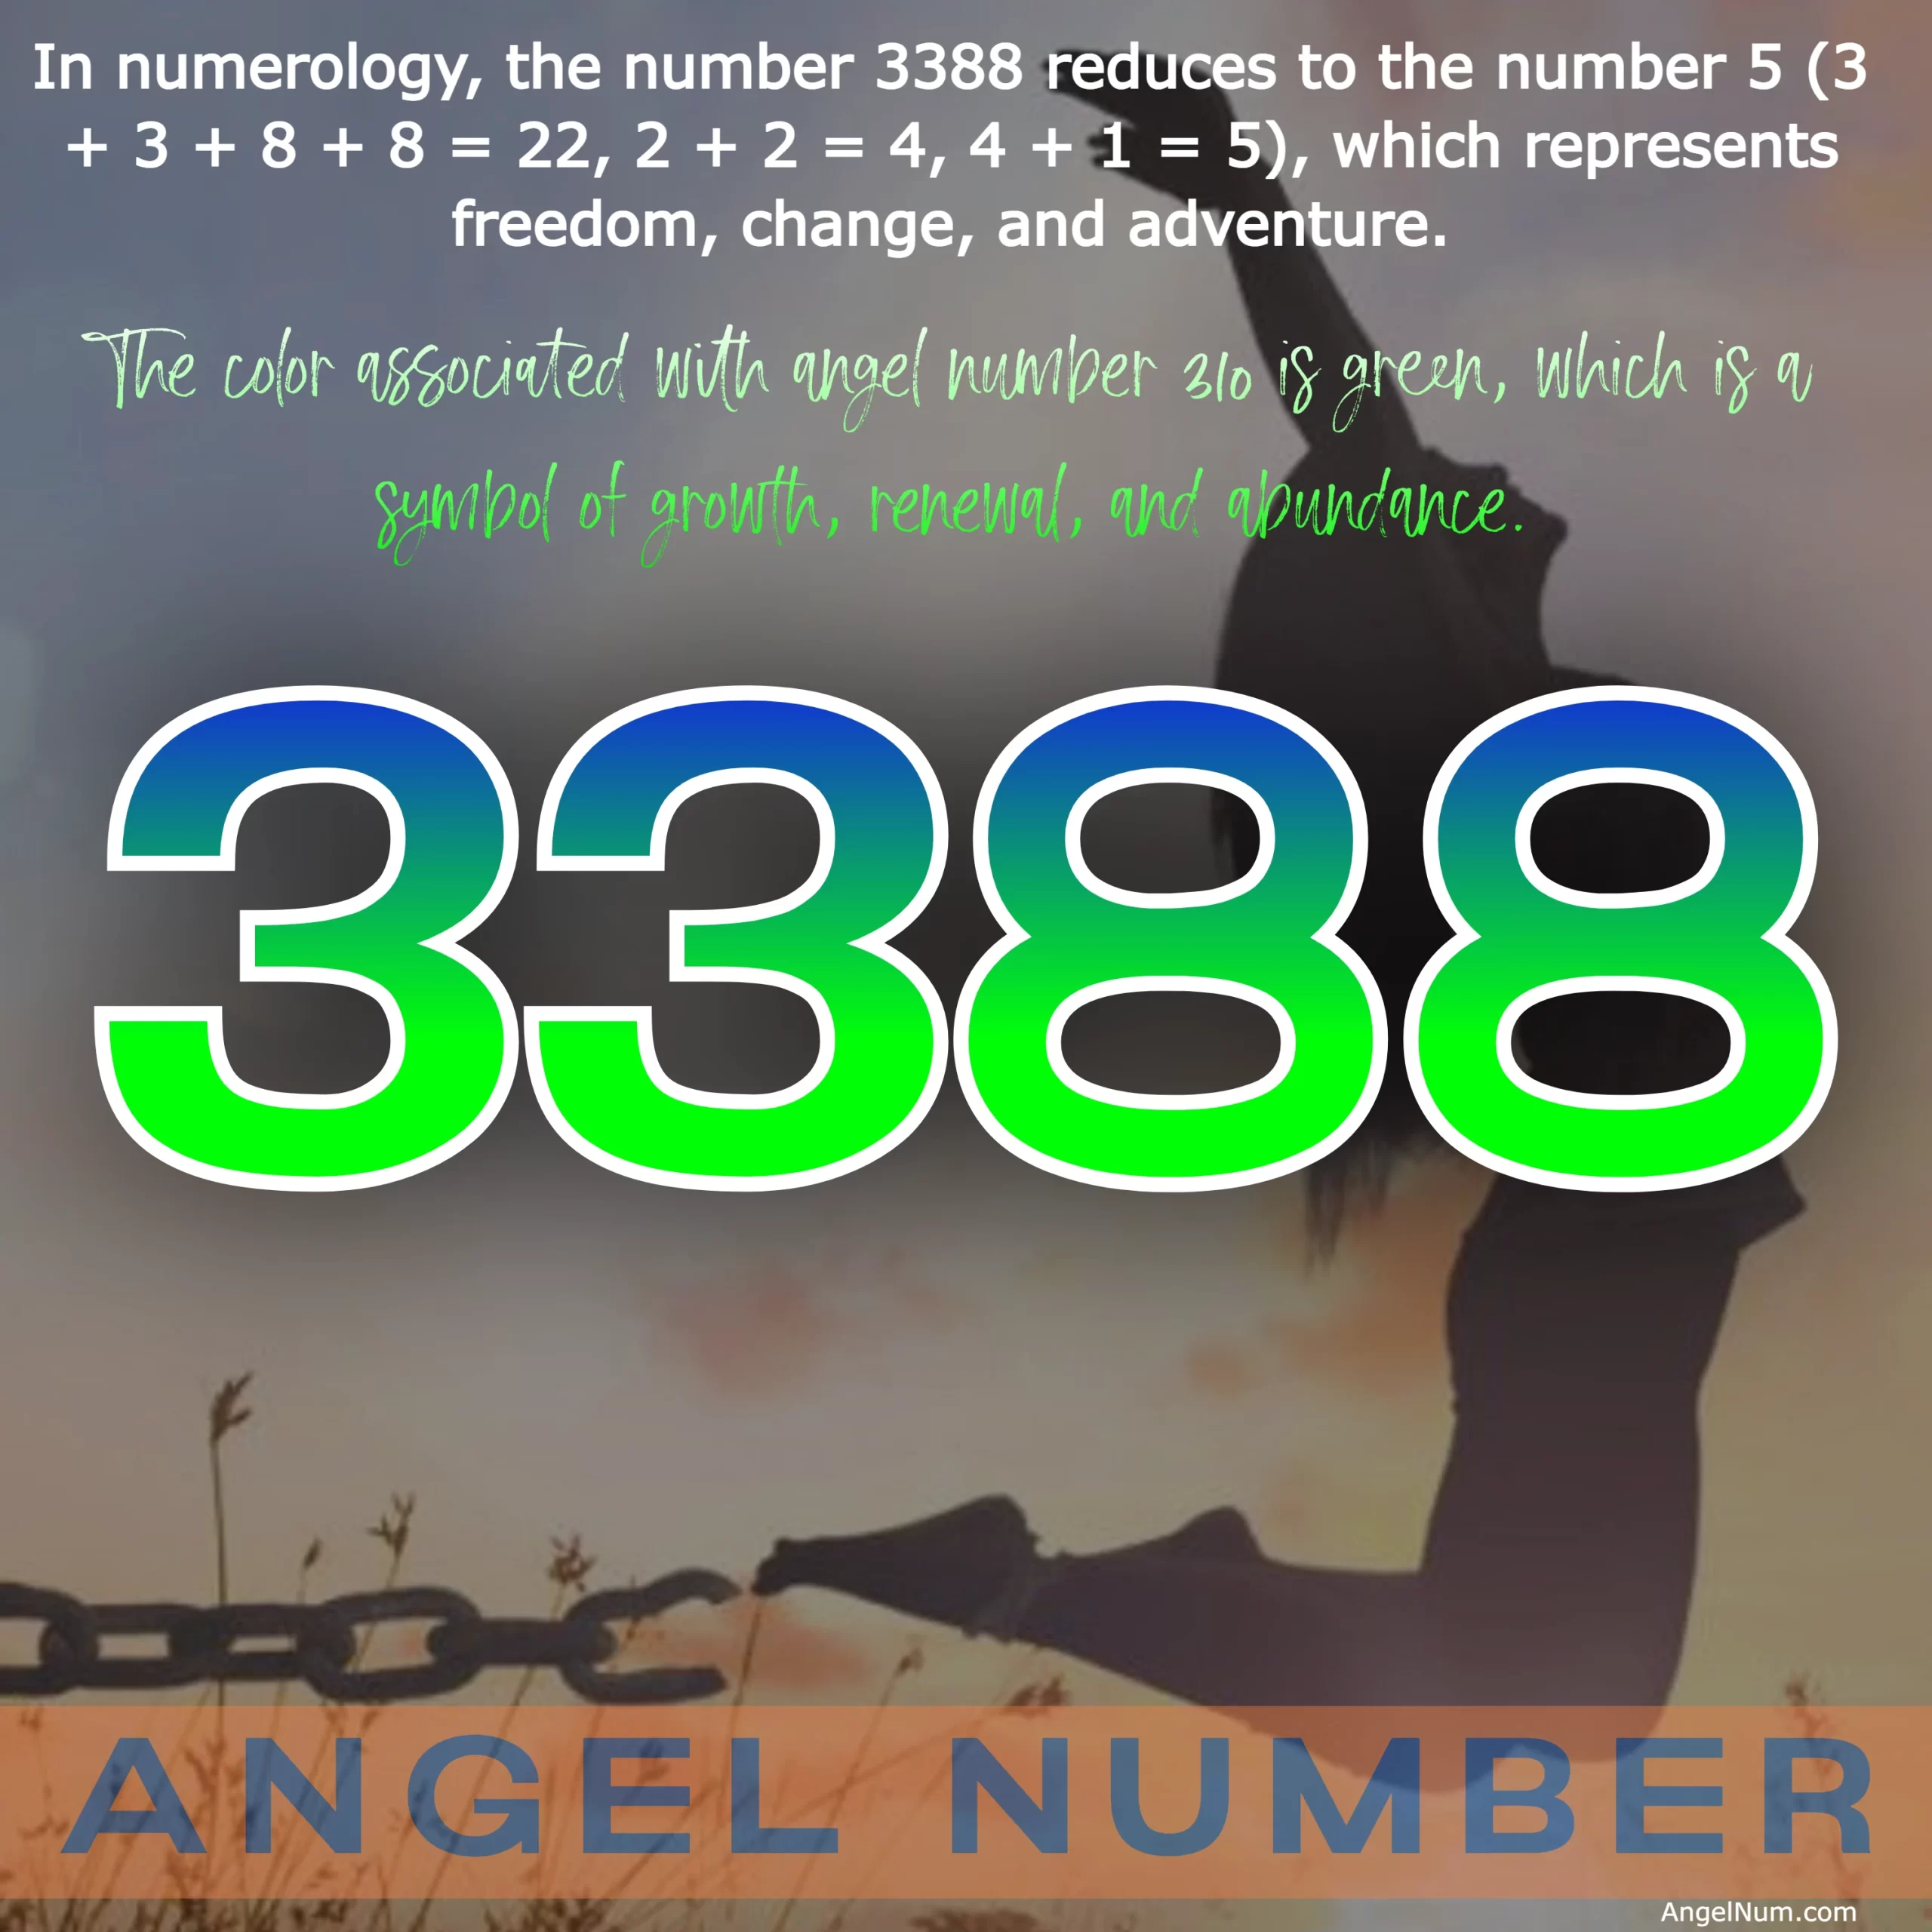 Discovering the Abundance and Success Behind Angel Number 3388